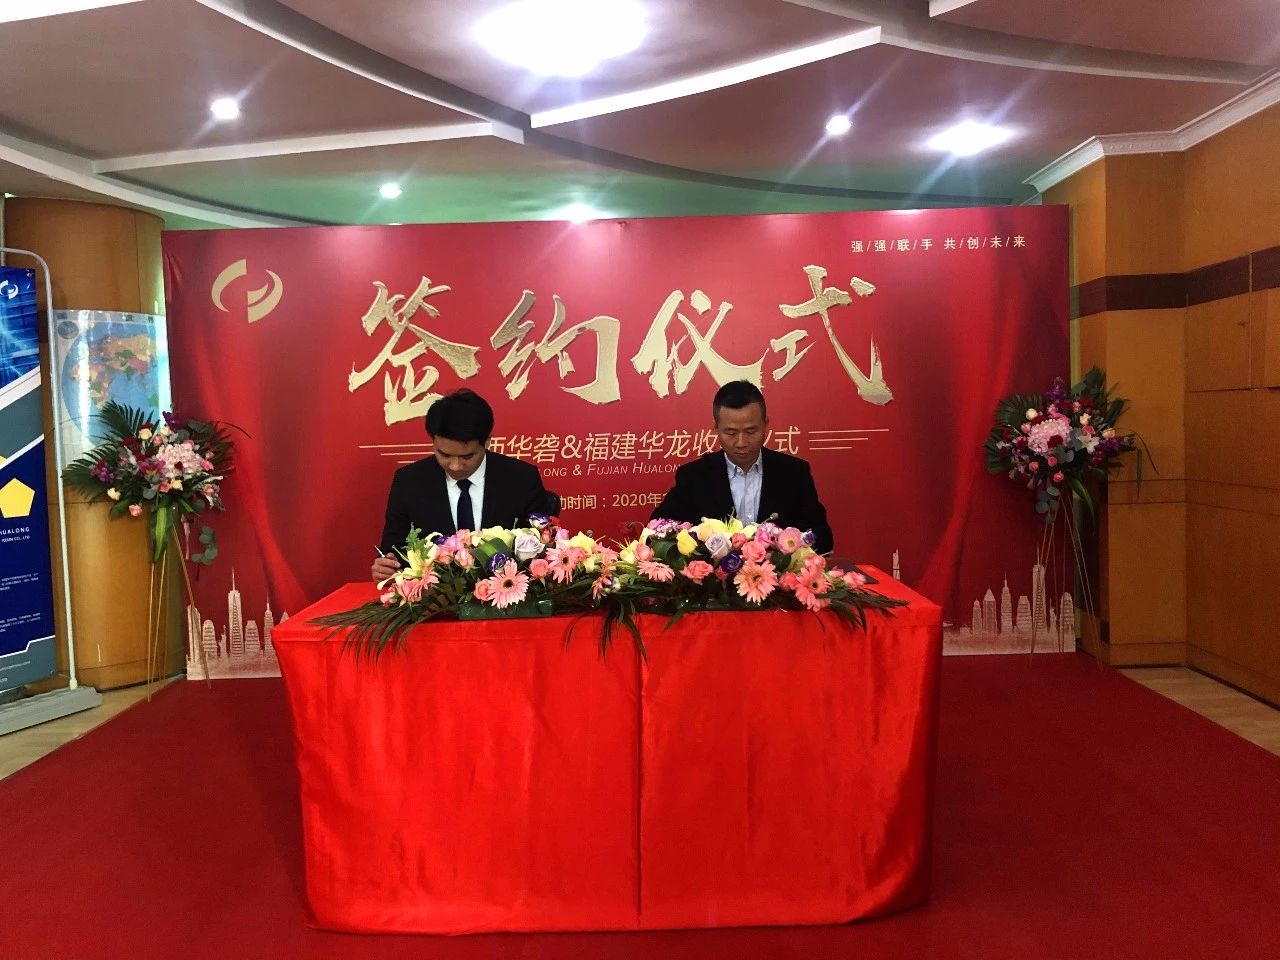 The signing ceremony of Guangxi Hualong purchasing Fujian Hualong resin completed